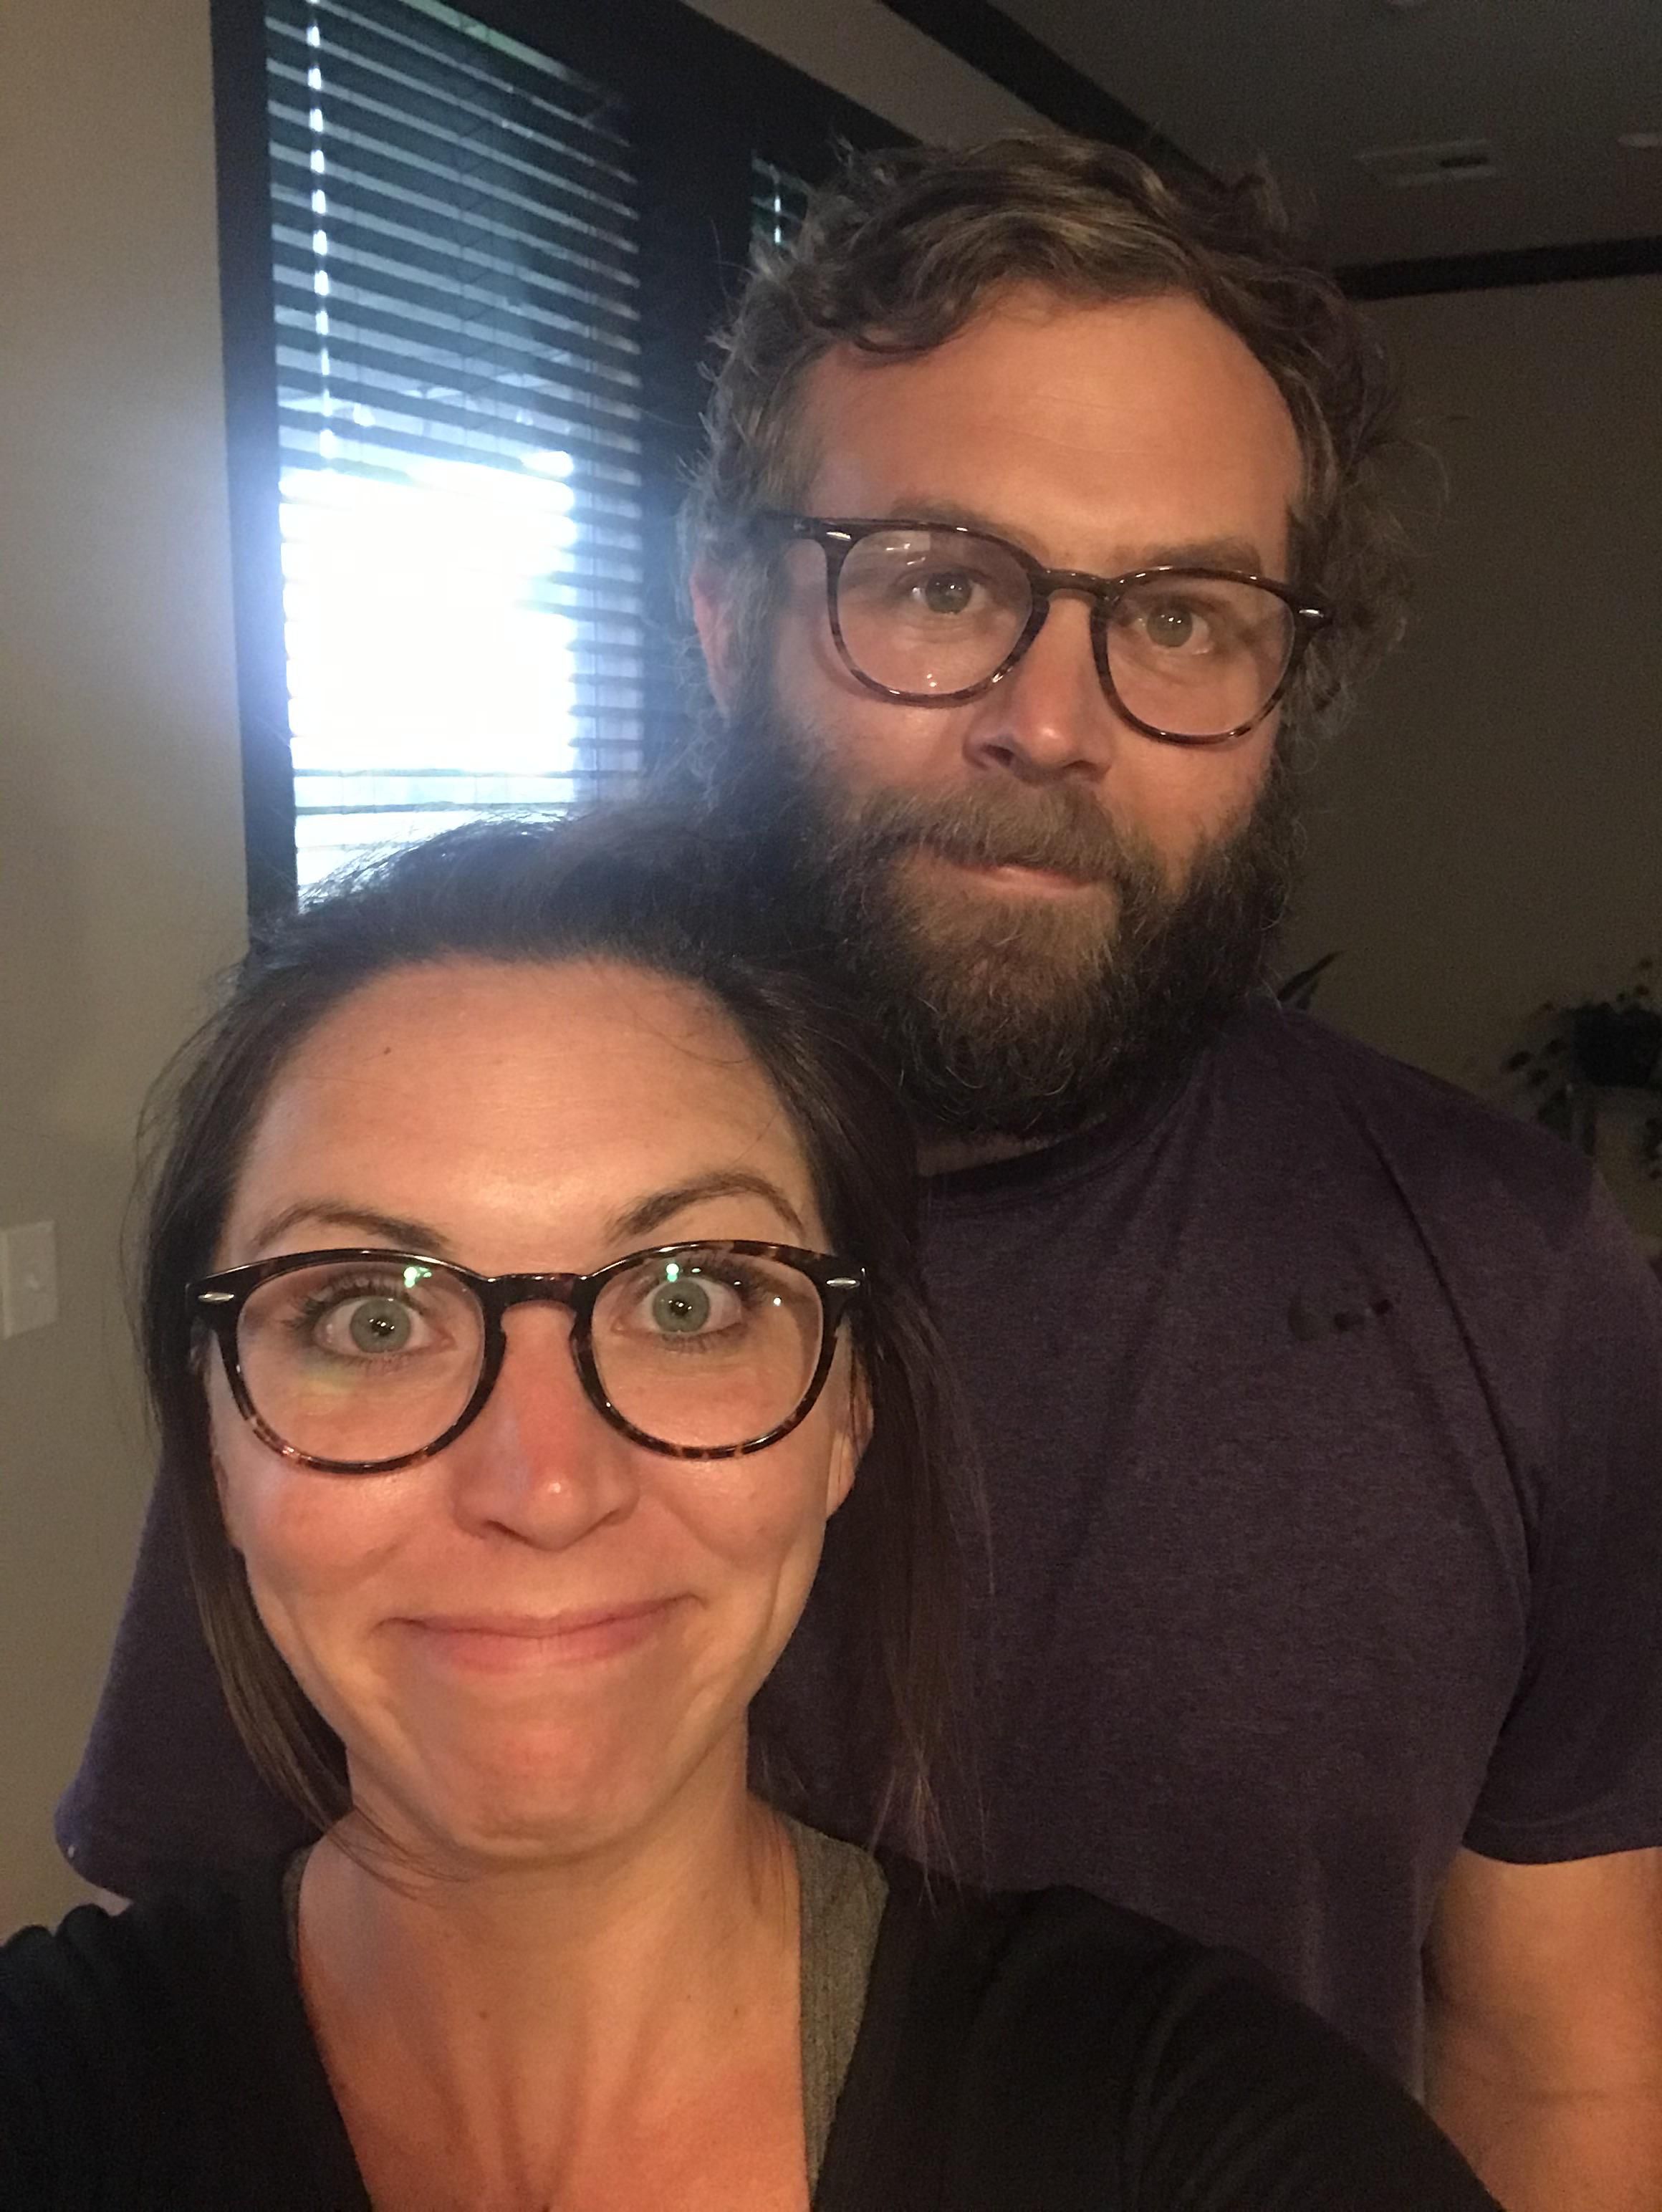 Husband and I both ordered new glasses. They arrived today. Turns out we both have great taste.